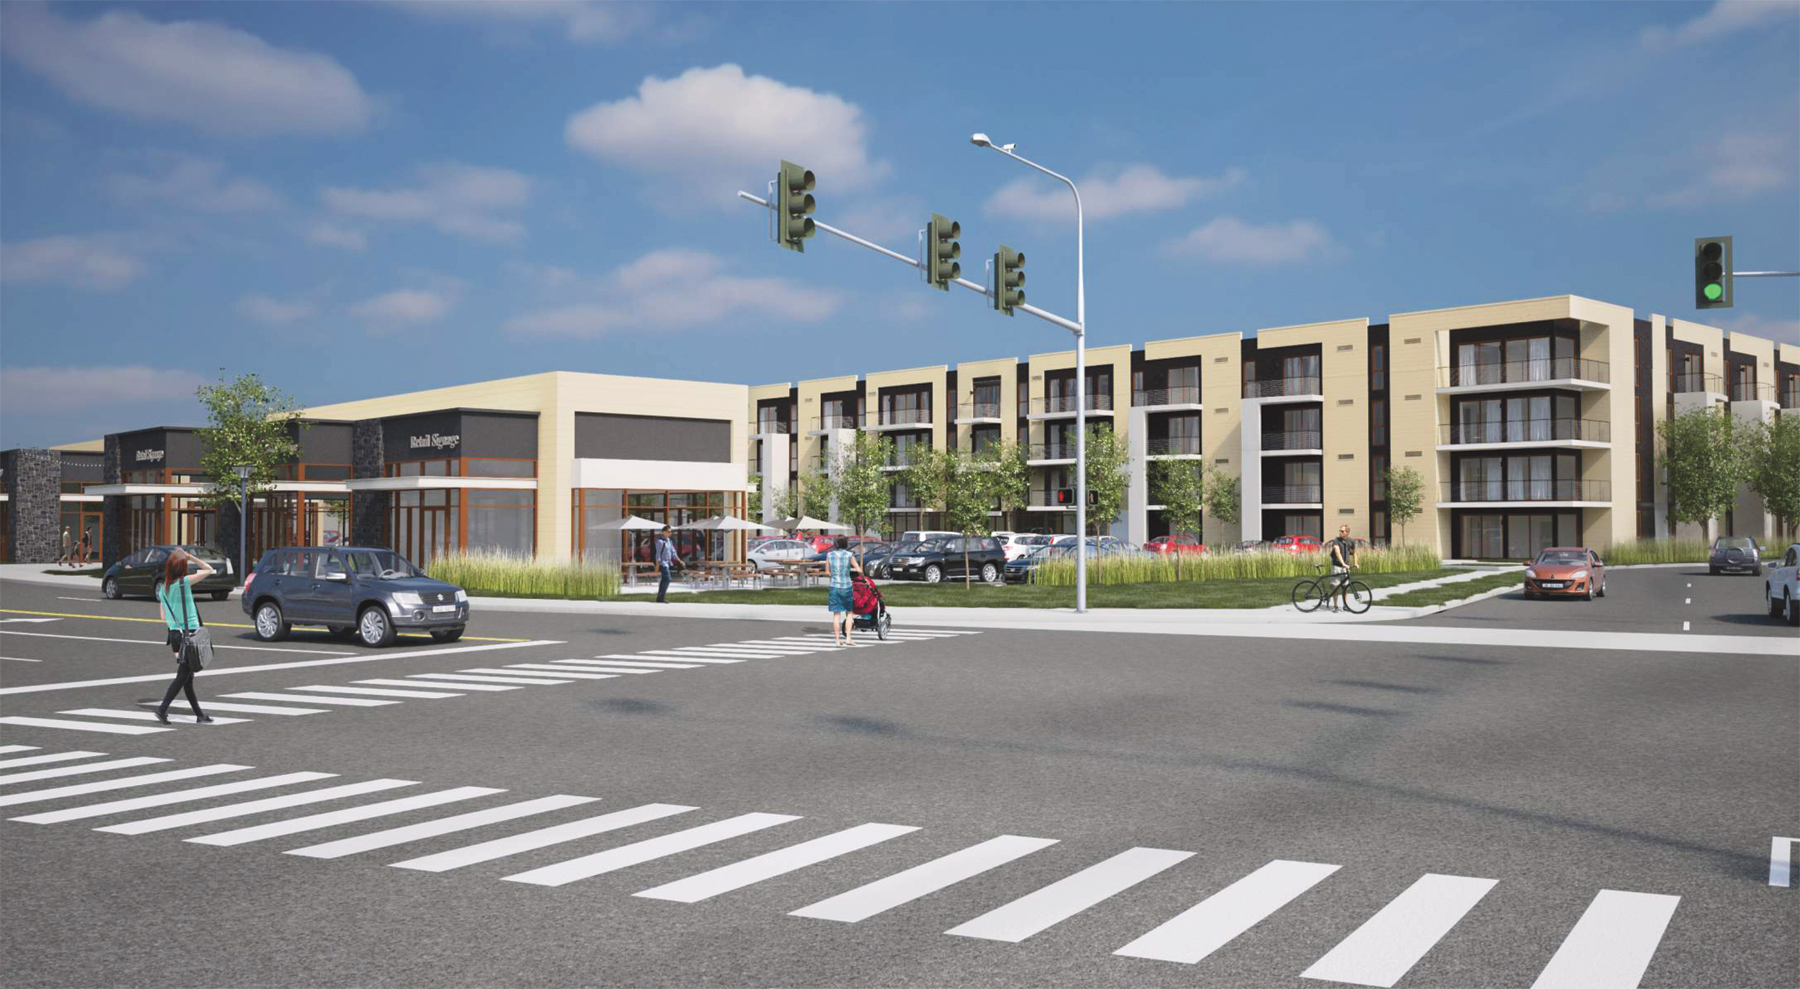 Boost Builds has teamed up with Illinois-based The Crown Group to develop the pit area at 650 George Washington Way in Richland. The project, called Park Place, includes plans for 106 apartments and 6,700 square feet of retail space. (Courtesy Boost Builds) 